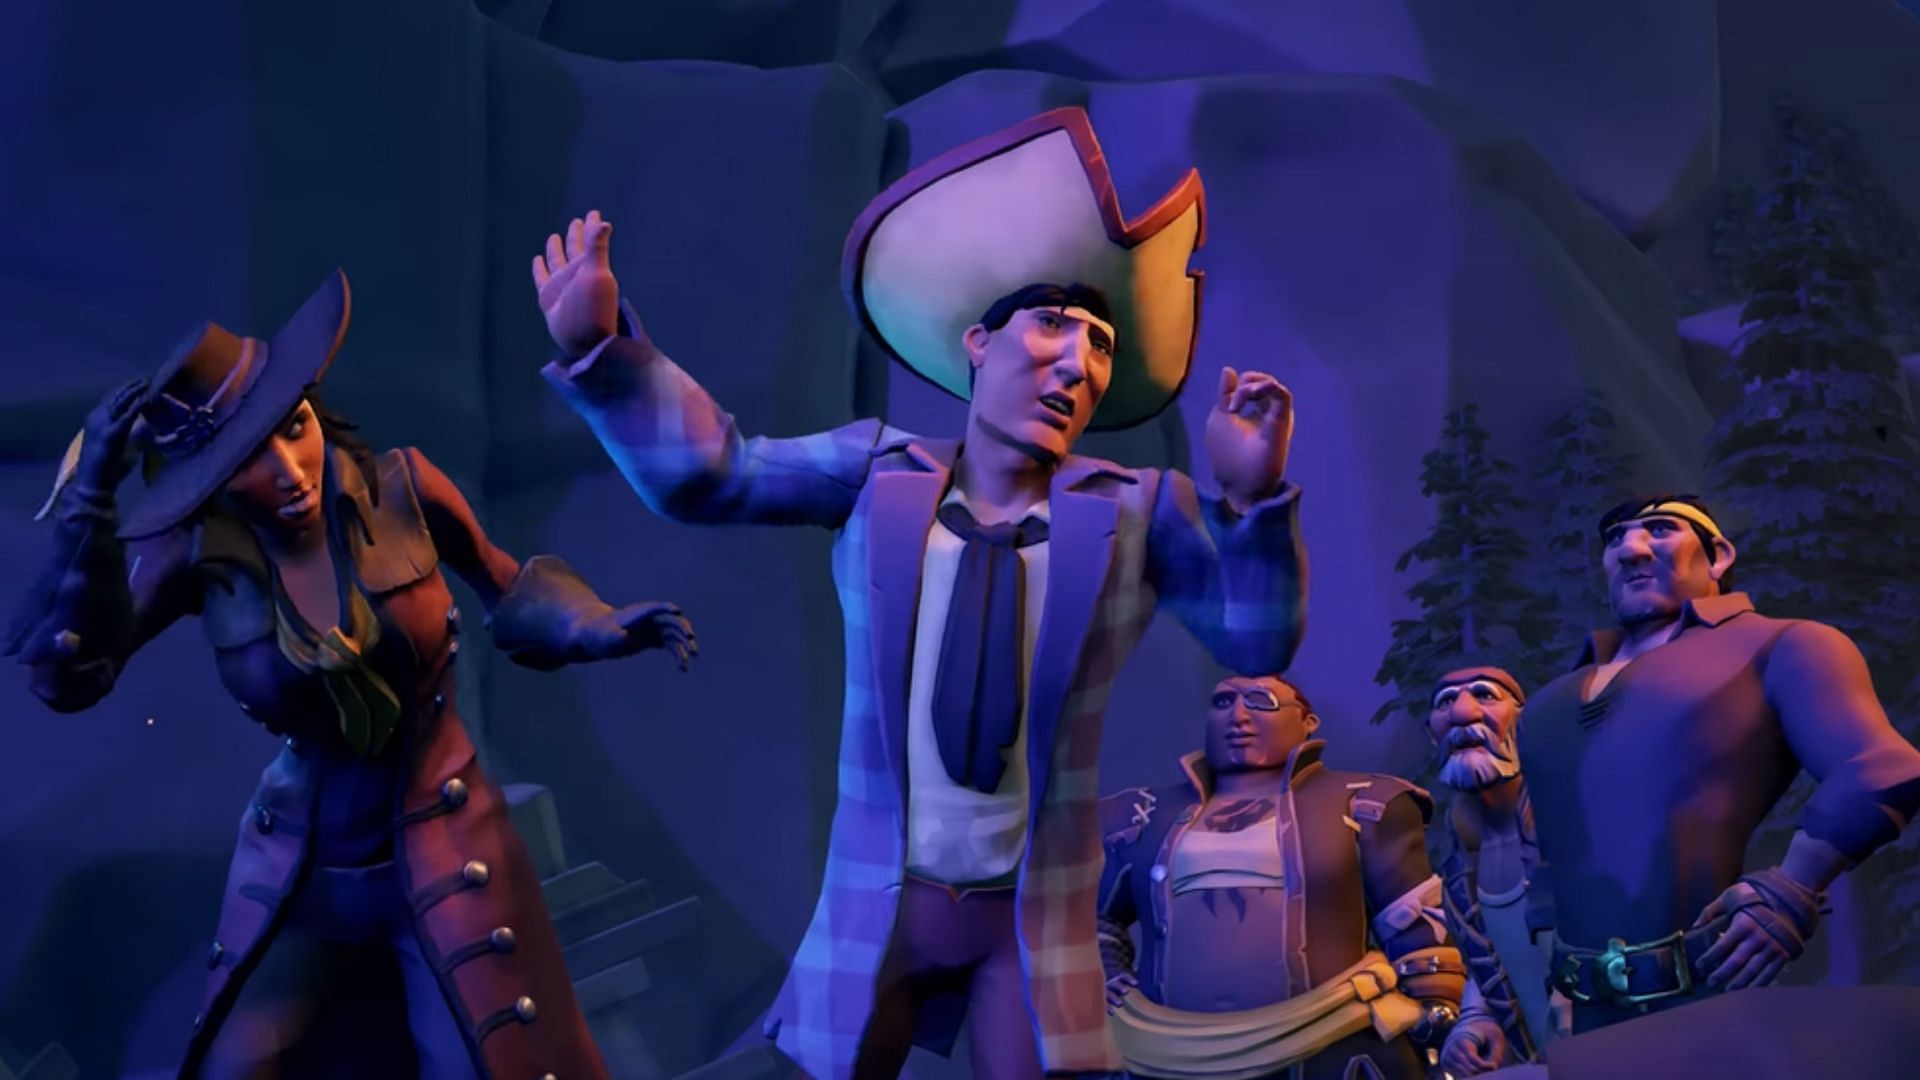 This expansion project consists of a new story campaign divided into three parts, all based on the Legend of Monkey Island (Image via YouTube/ Xbox)